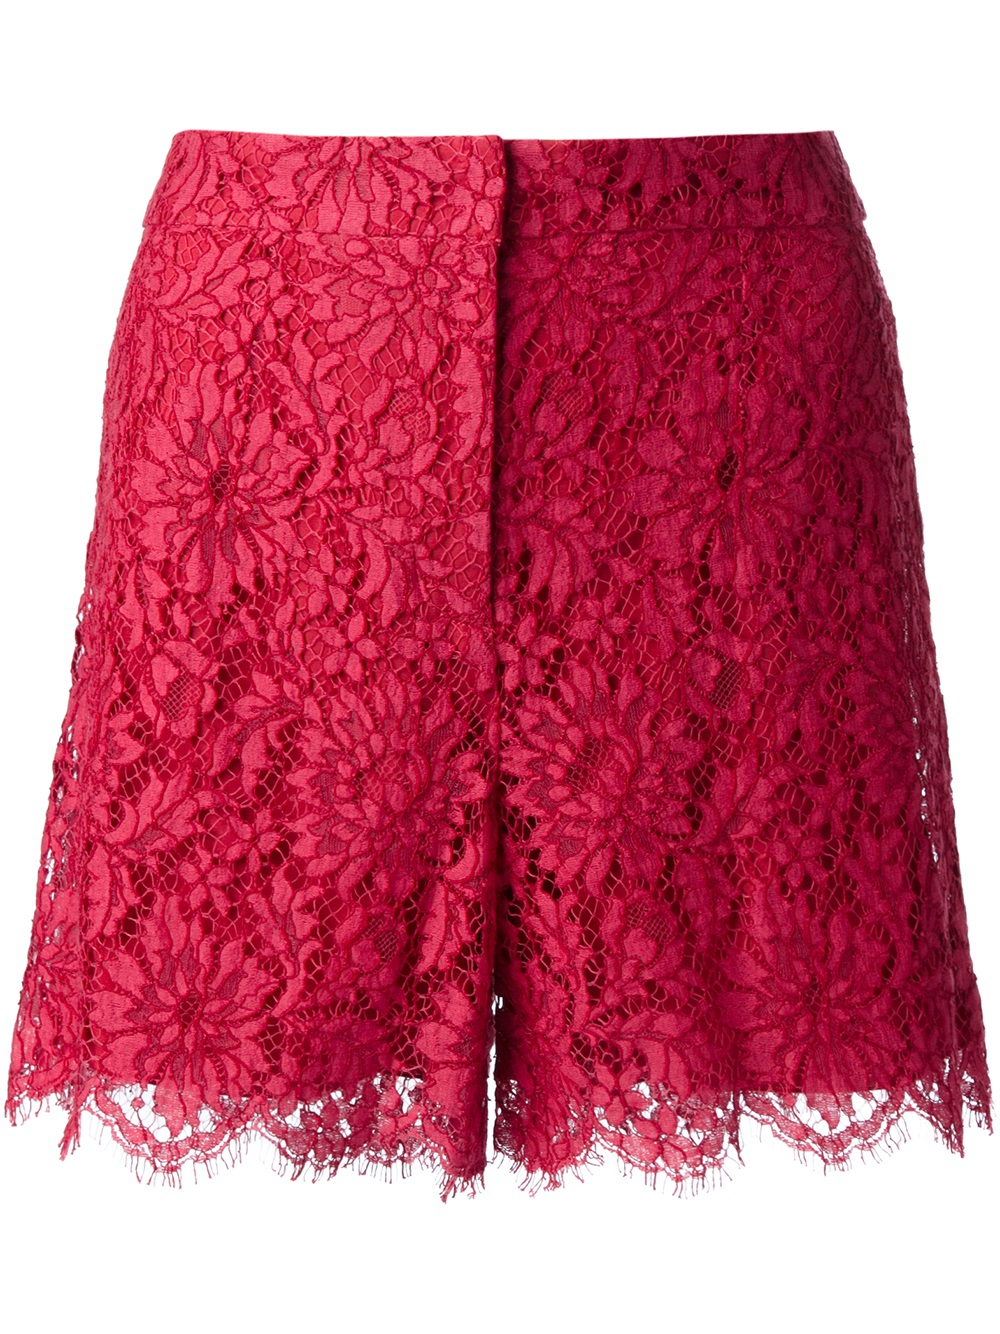 Lyst - Dolce & Gabbana Floral Lace Shorts in Red